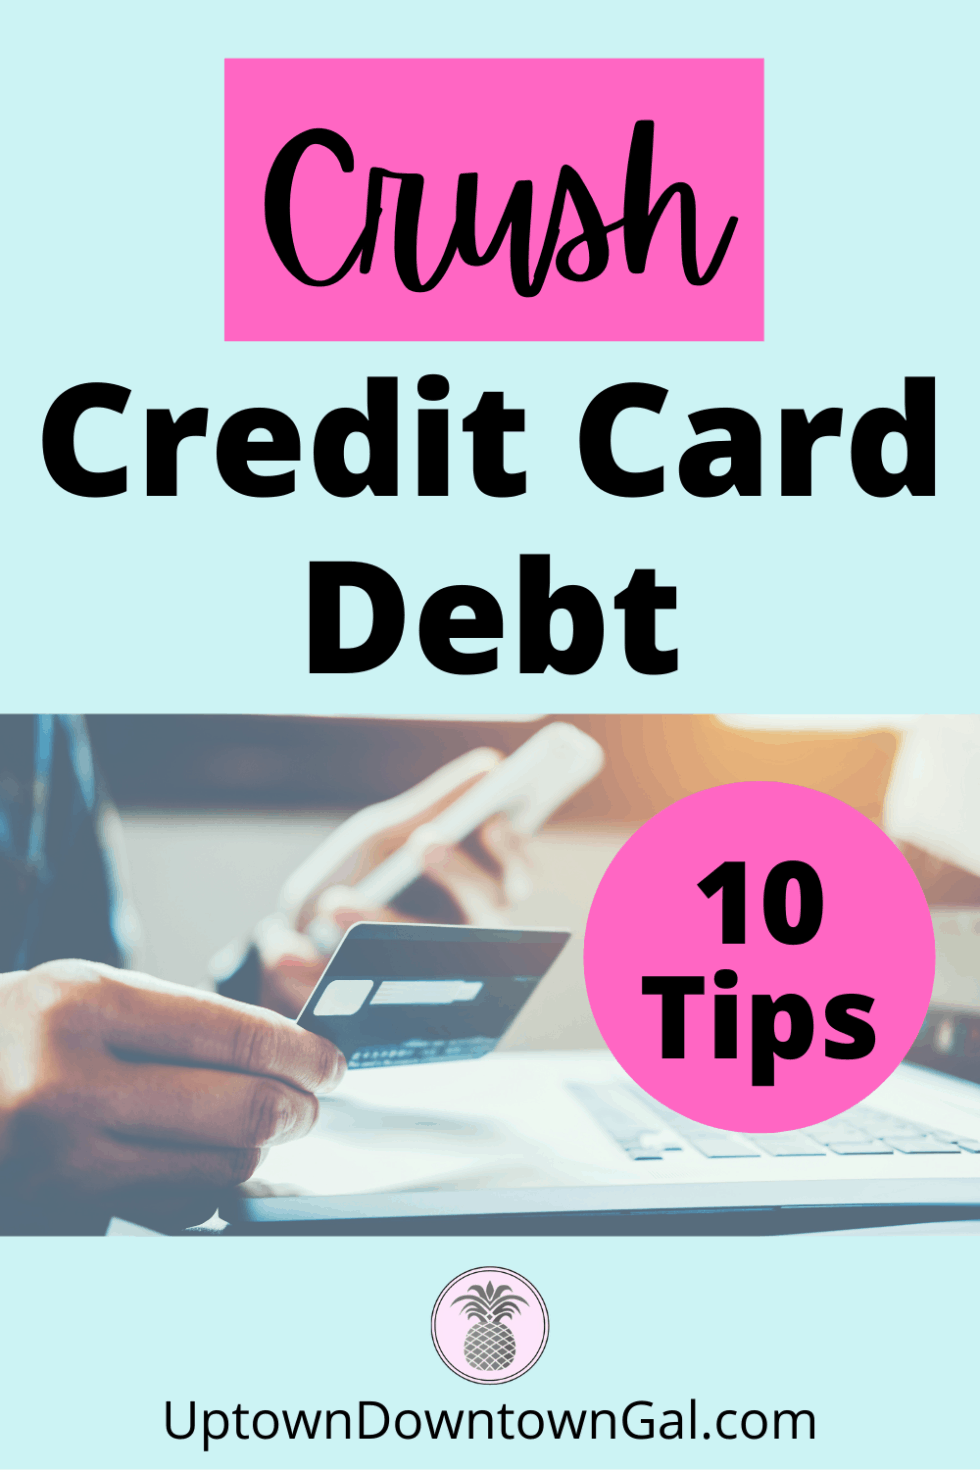 Pay Off Credit Card Debt Fast - Uptown Downtown Gal